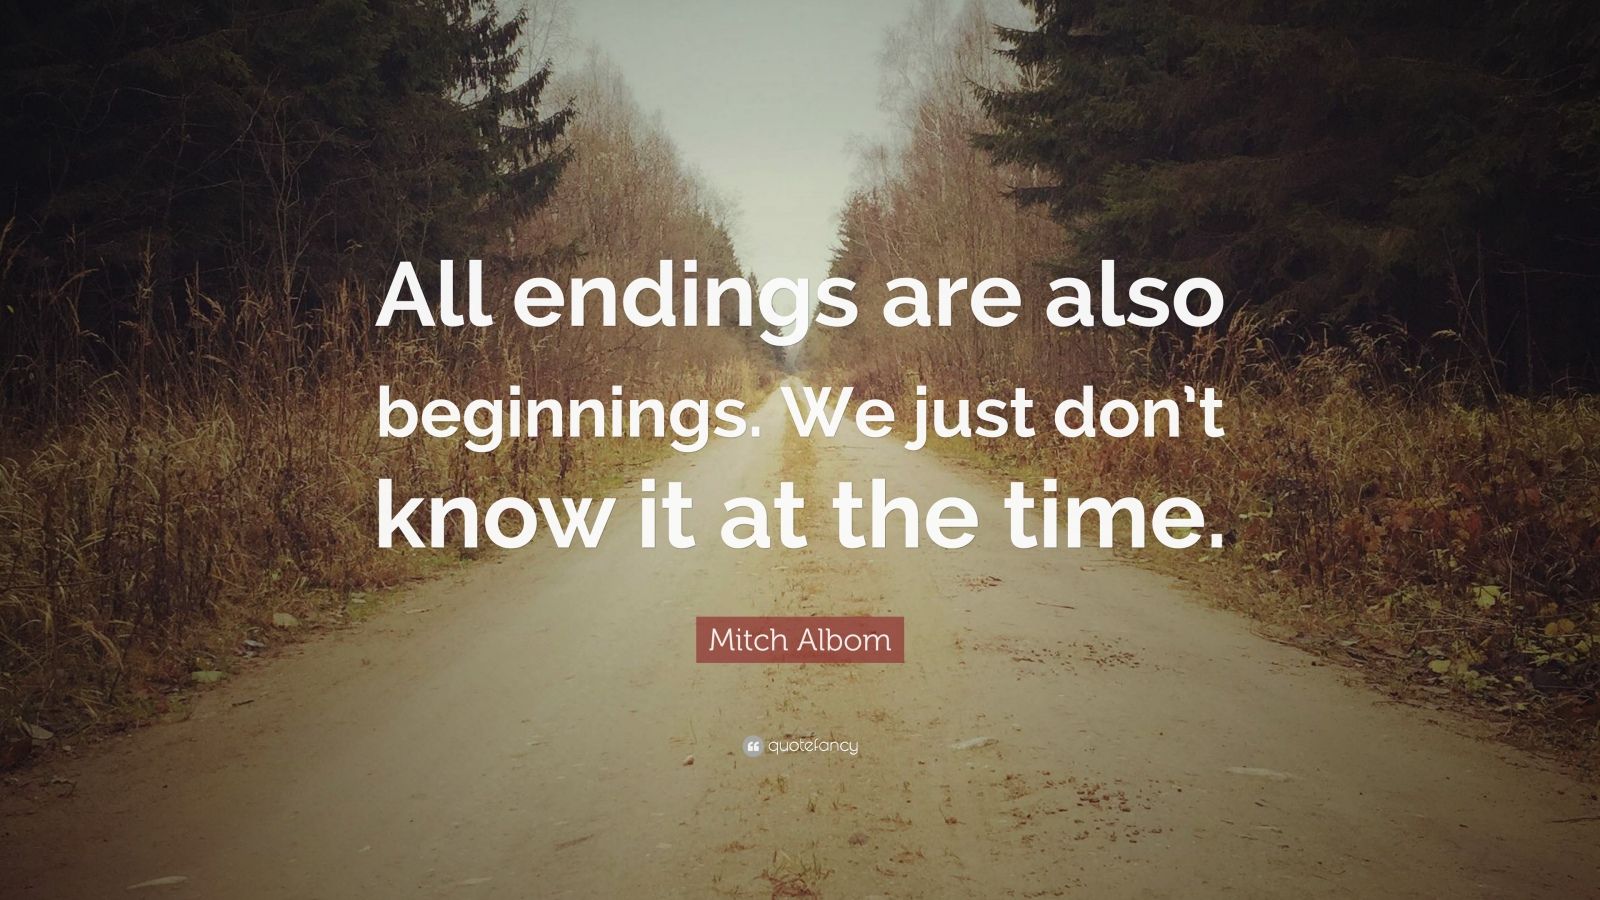 Mitch Albom Quote: “All endings are also beginnings. We just don’t know